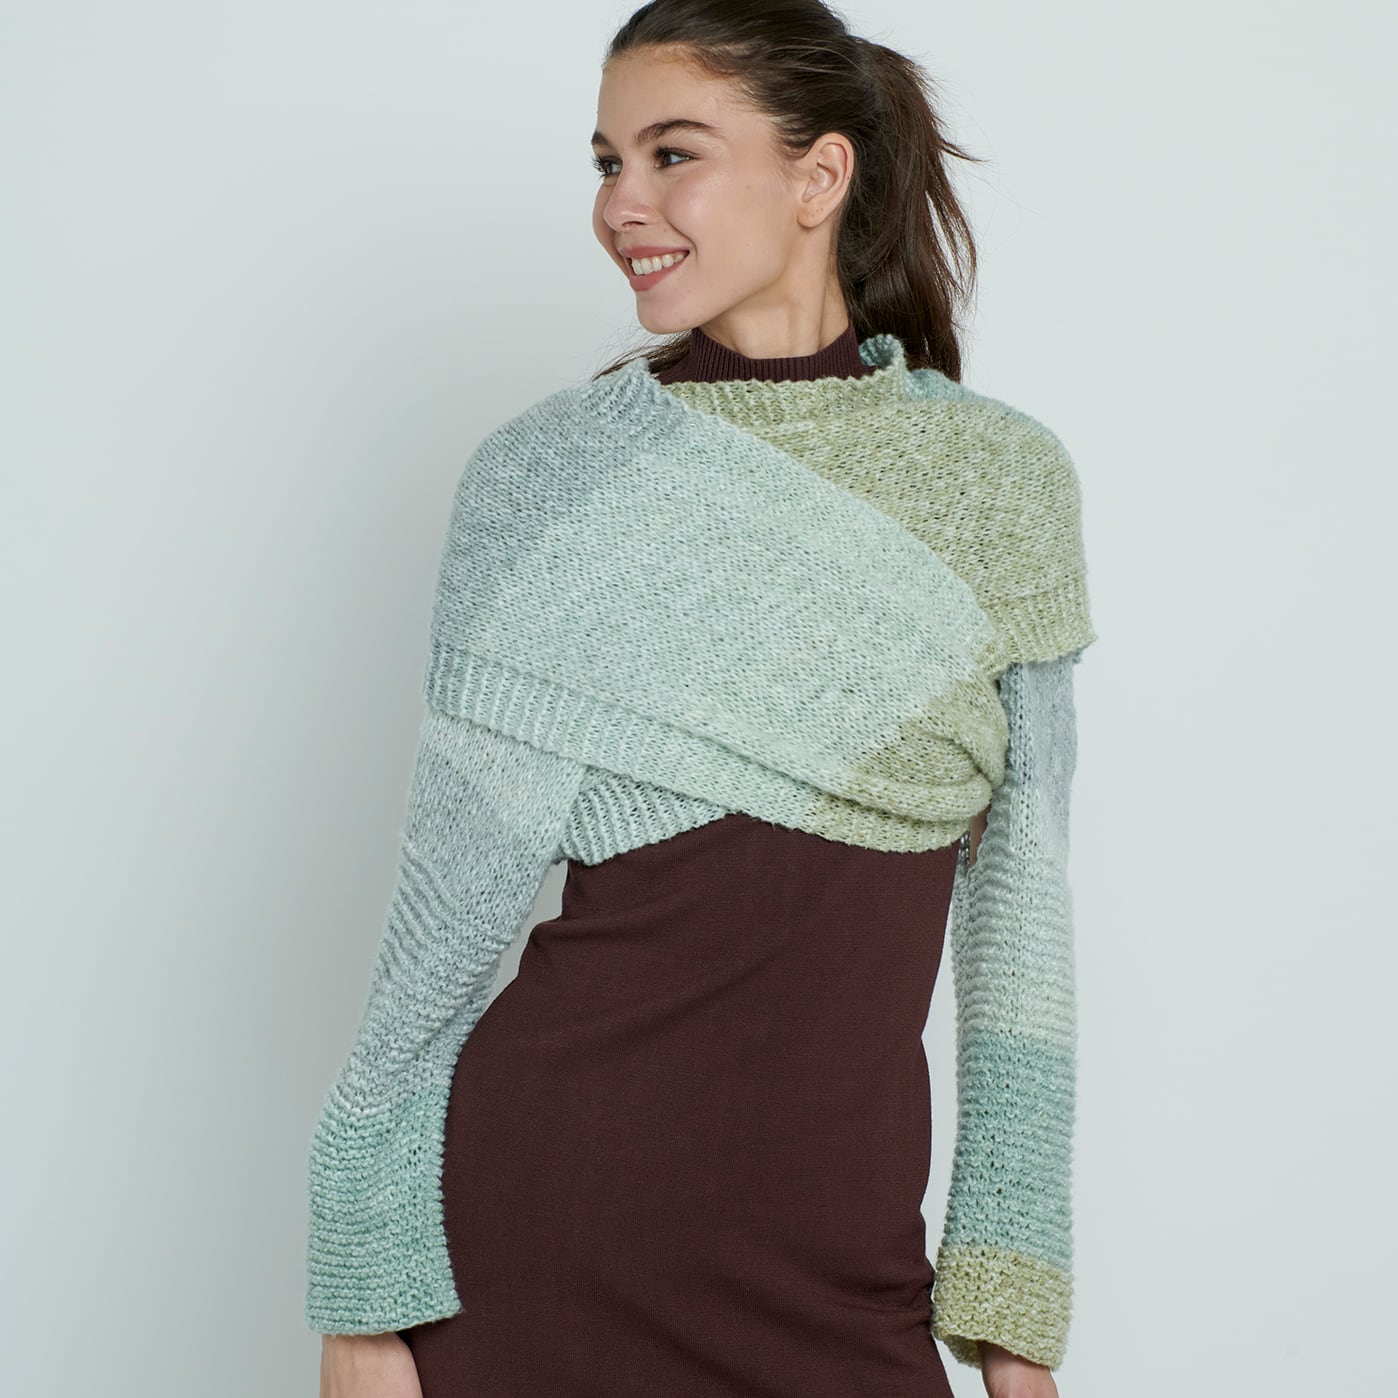 Caron® Cloud Cakes™ Knit Convertible Shrug Wrap, Projects